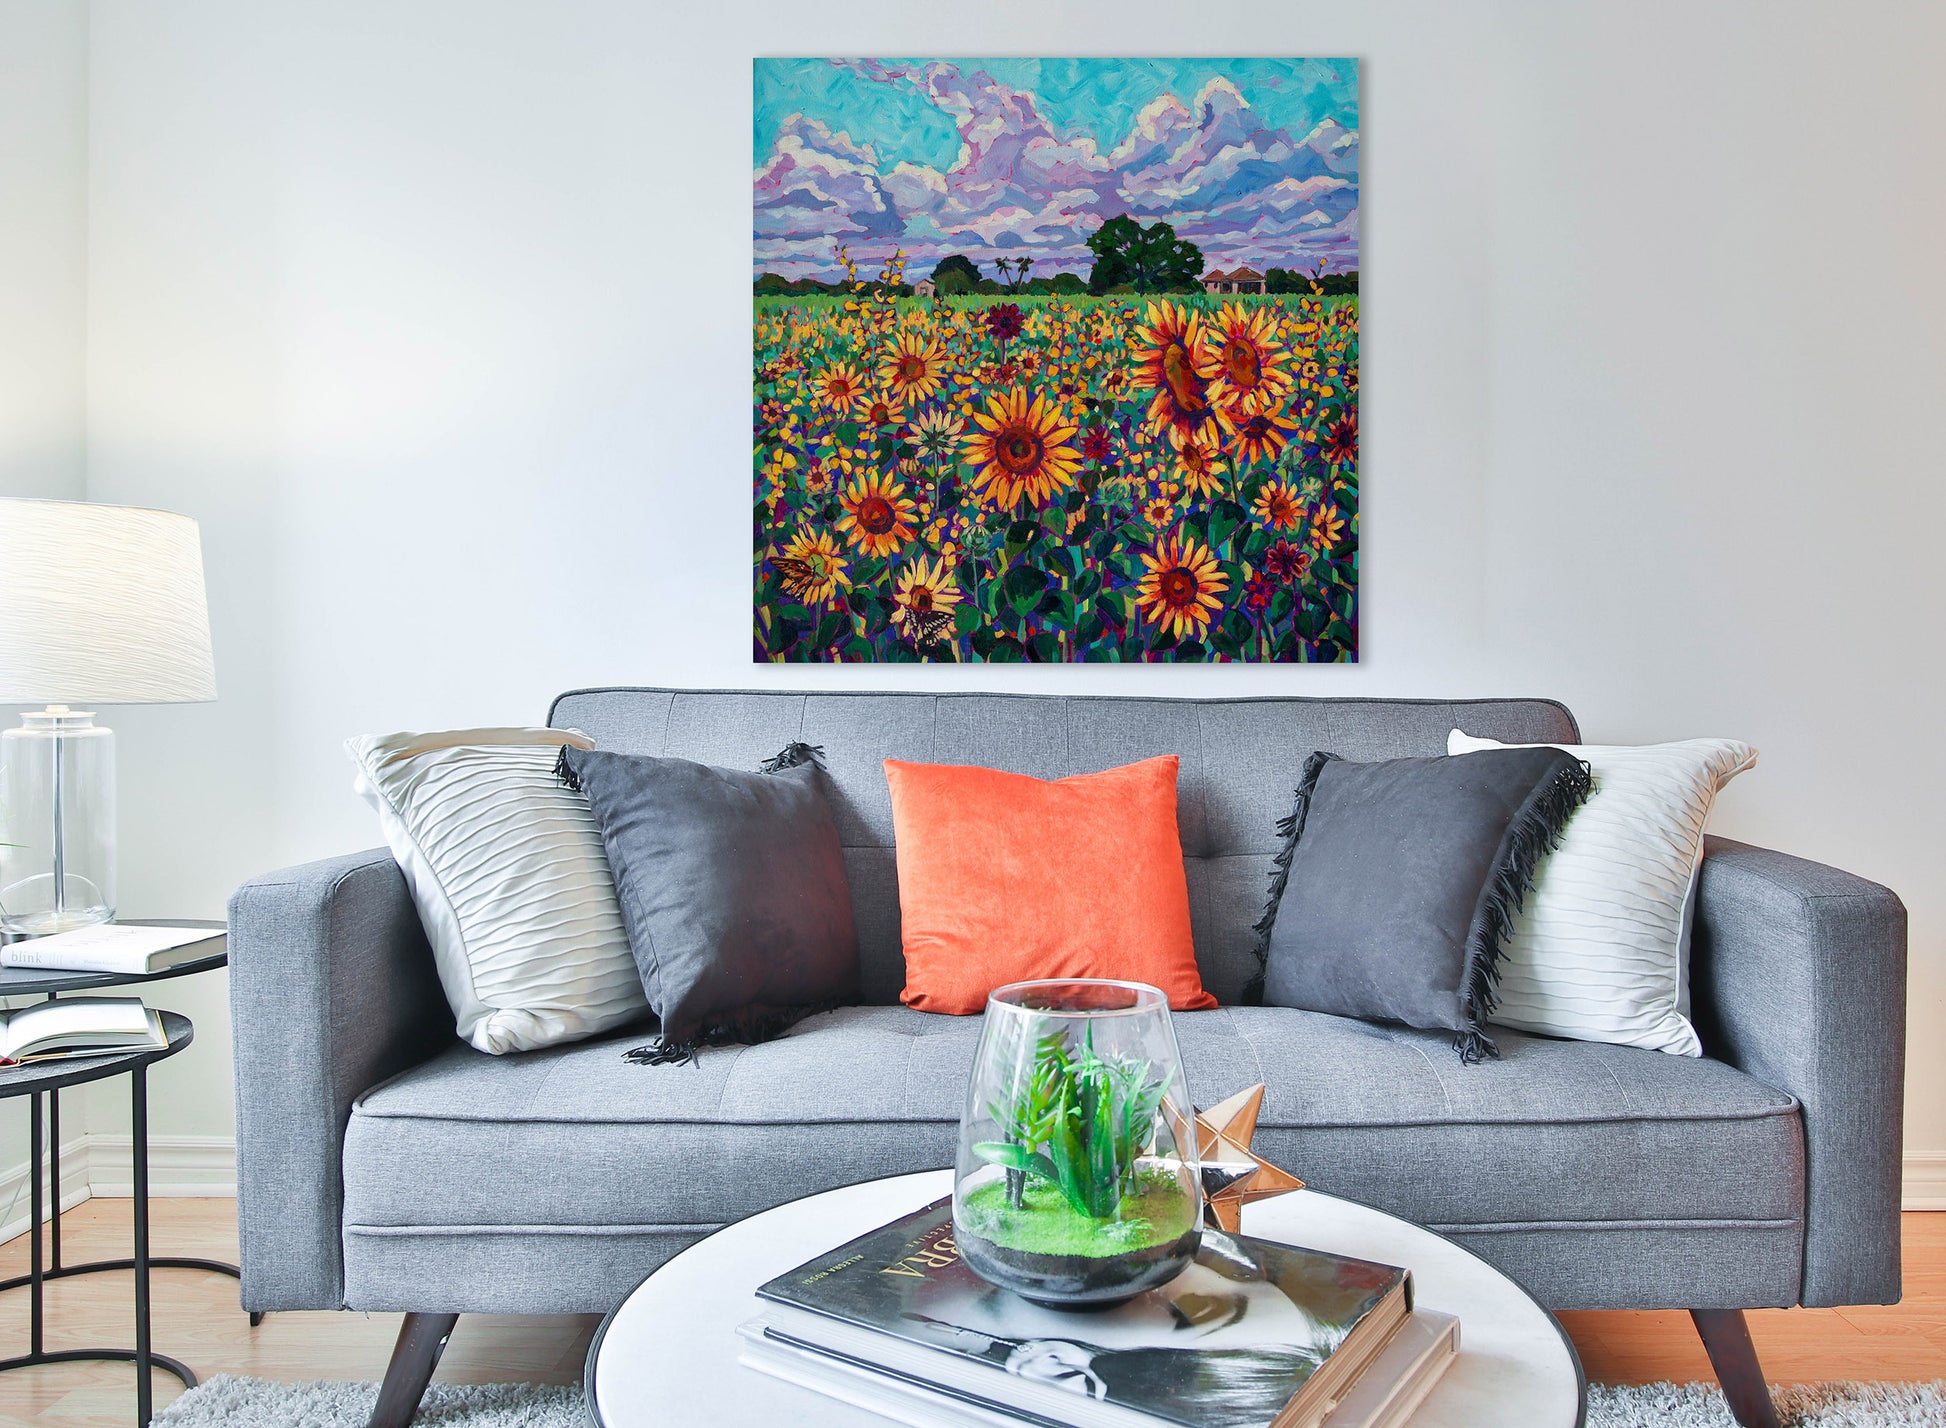 Original vibrant  impressionistic painting of sunflowers in a field on living room wall